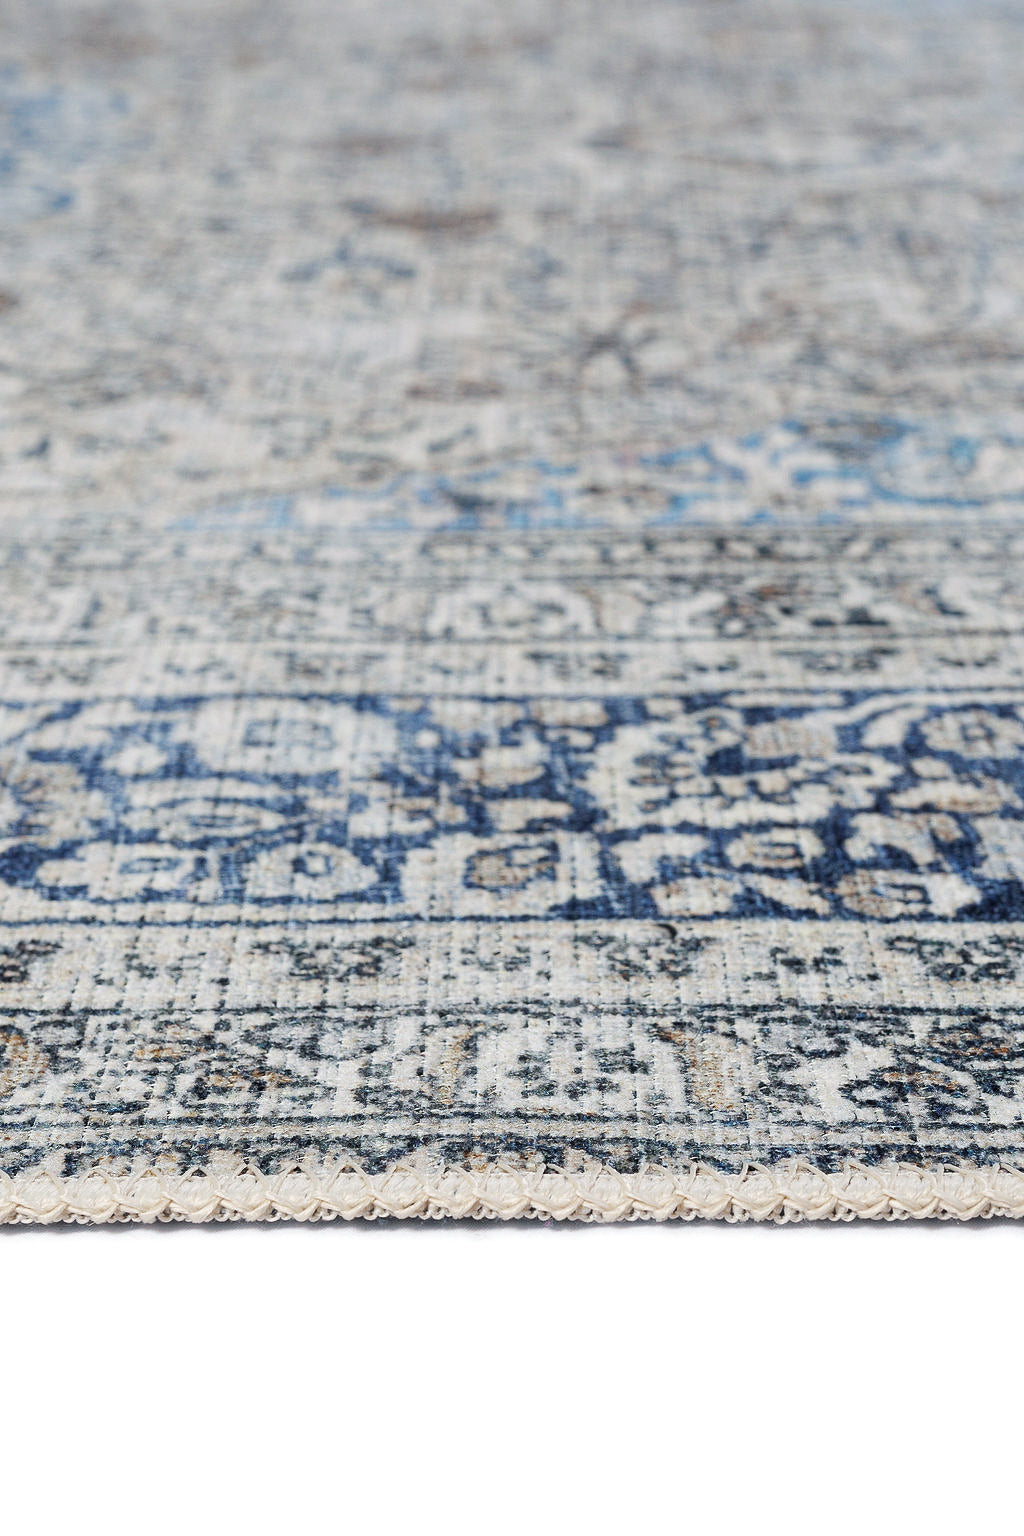 Blue and grey bordered vintage style rug